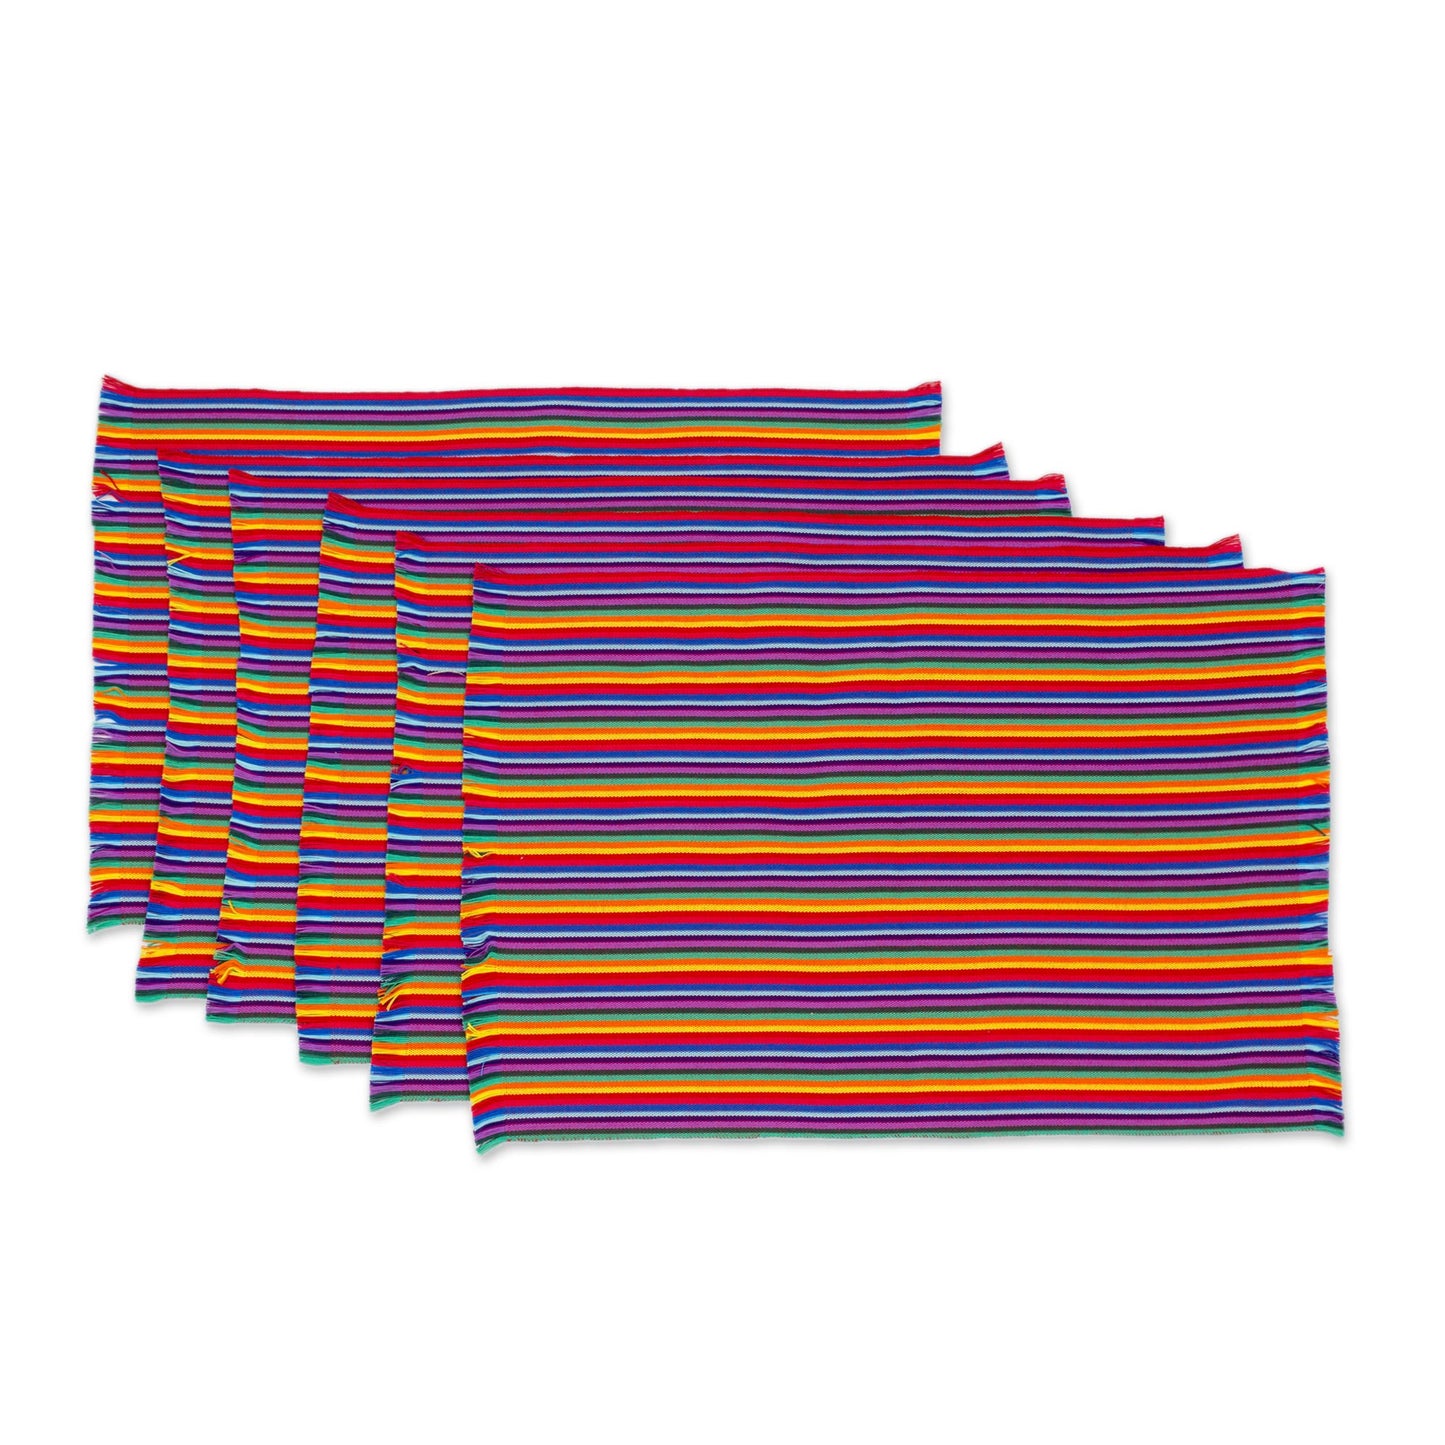 Rainbow Inspiration Six Multicolored Striped Cotton Placemats from Guatemala